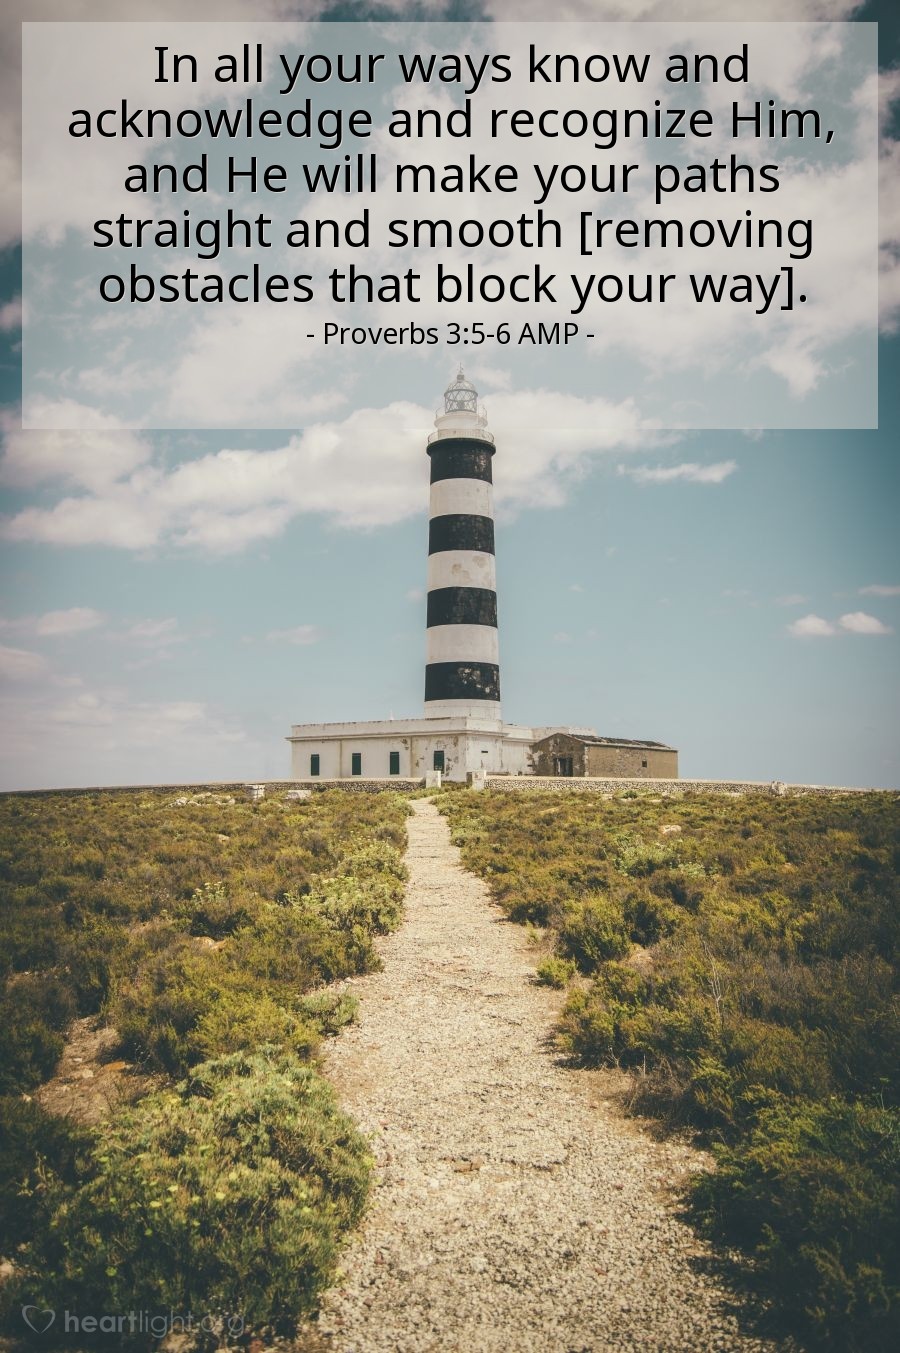 Illustration of Proverbs 3:5-6 AMP — Trust in and rely confidently on the Lord with all your heart and do not rely on your own insight or understanding. In all your ways know and acknowledge and recognize Him, and He will make your paths straight and smooth [removing obstacles that block your way].